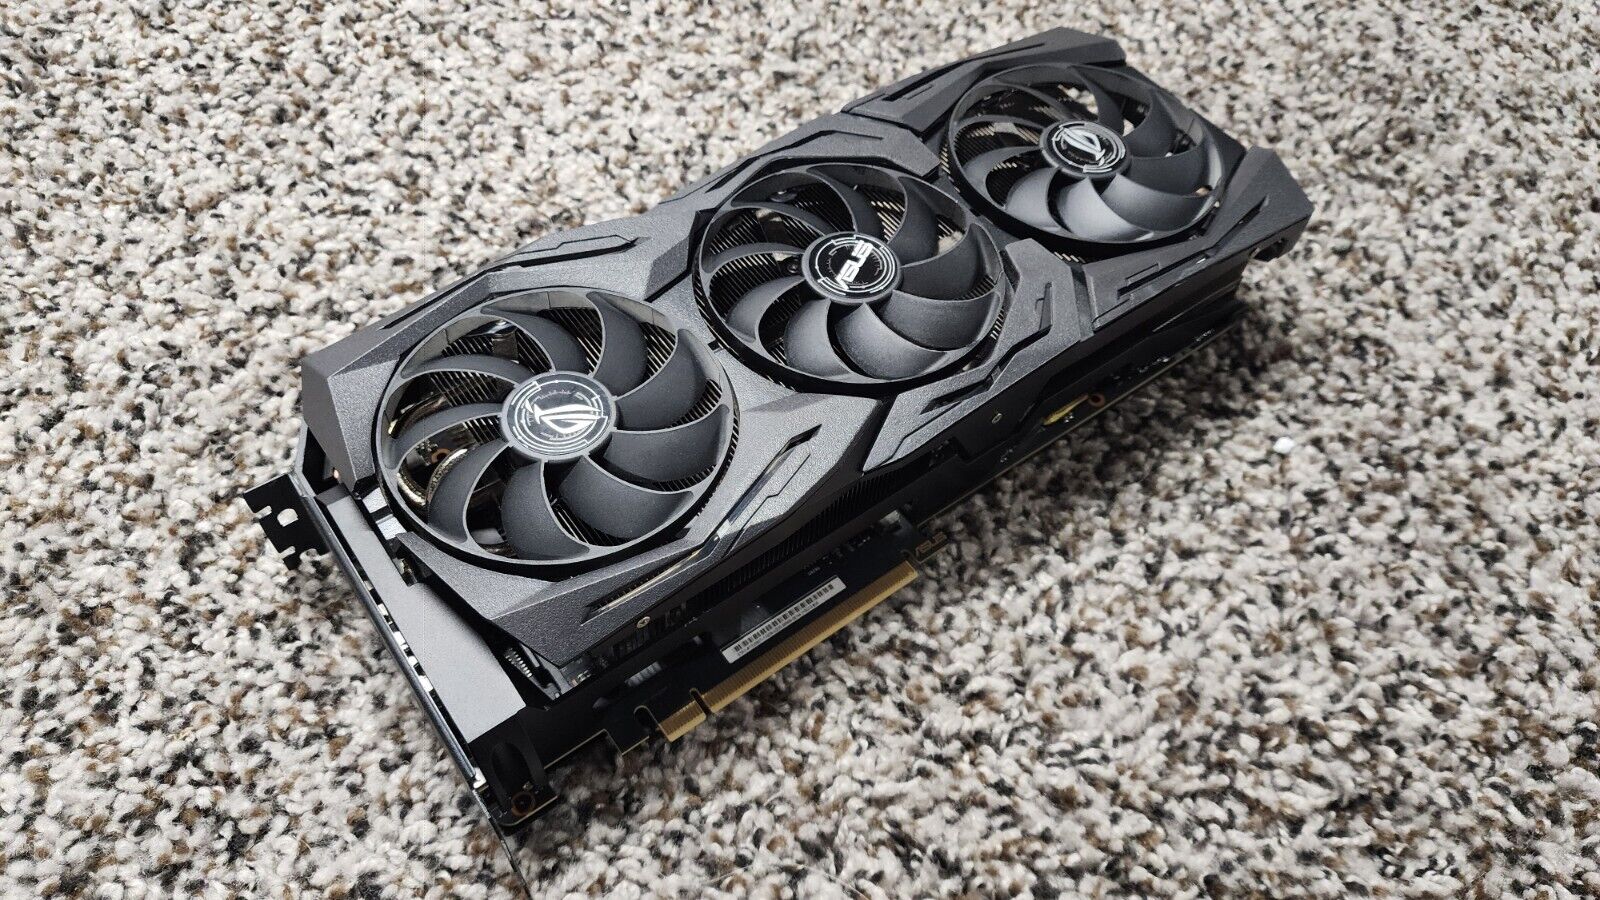 ASUS ROG STRIX RTX2080TI 11GB - NO CORE - PARTS ONLY - DOES NOT WORK